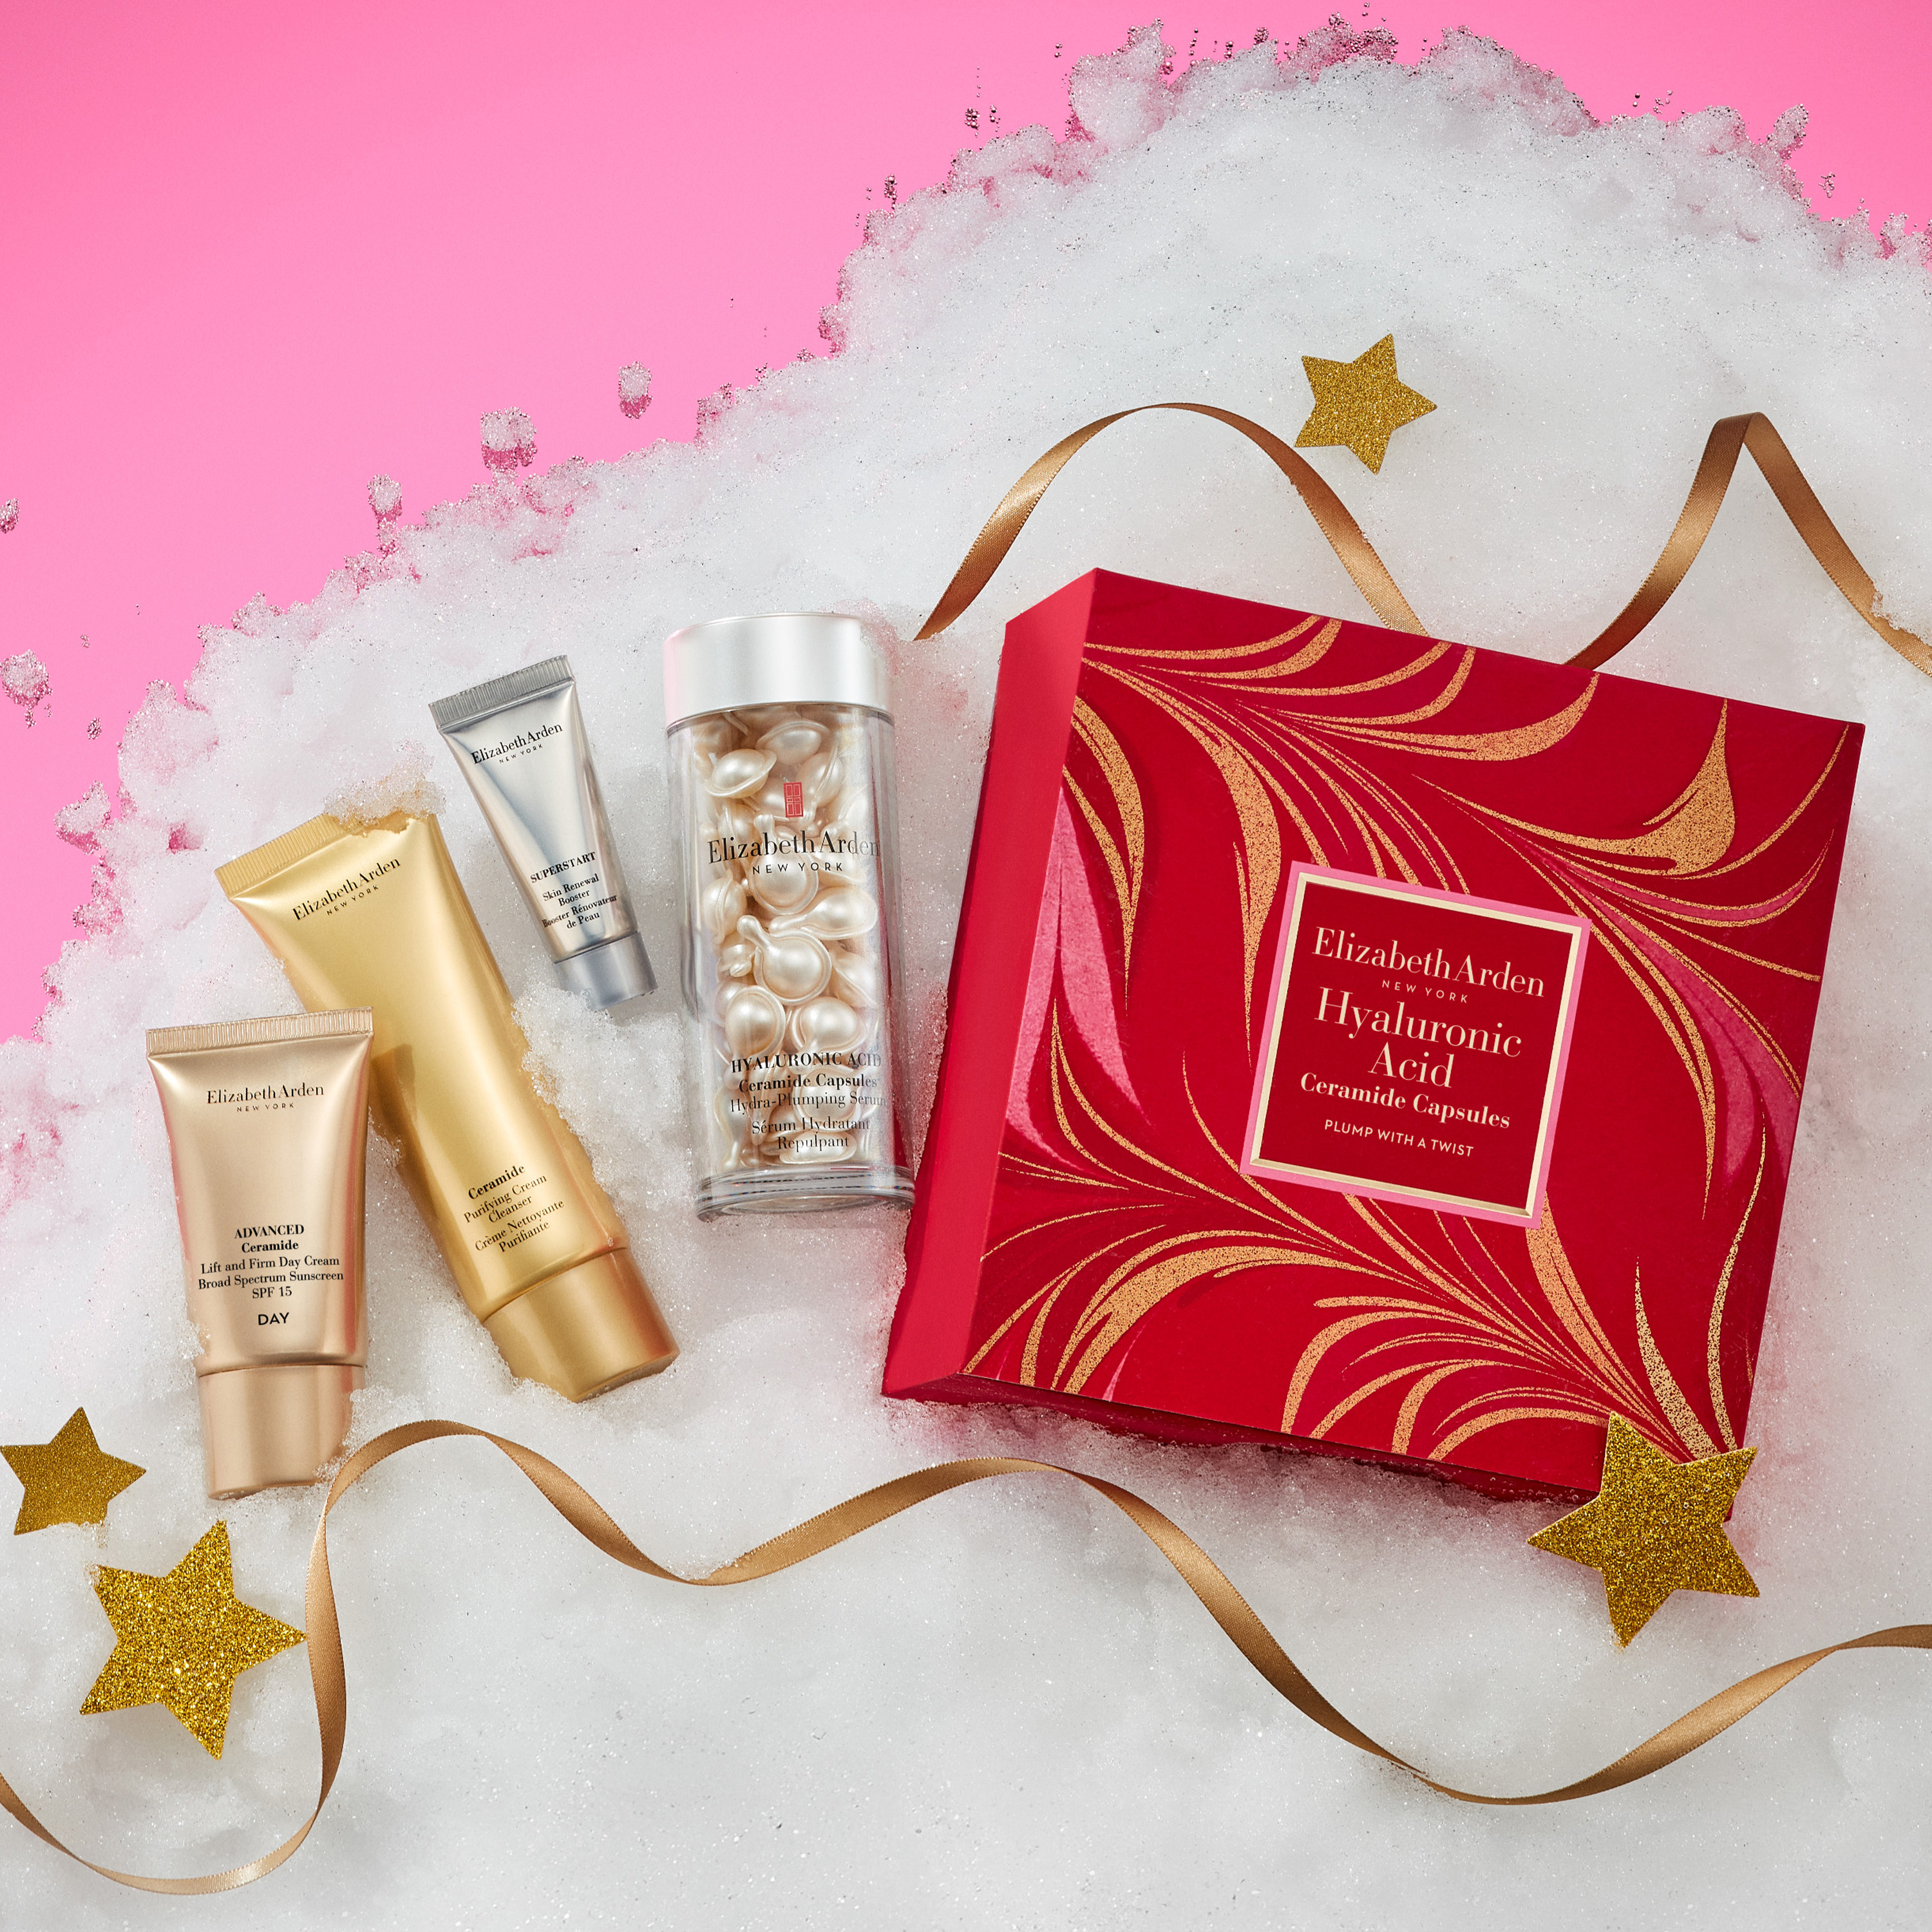 Shop Skincare Gifts